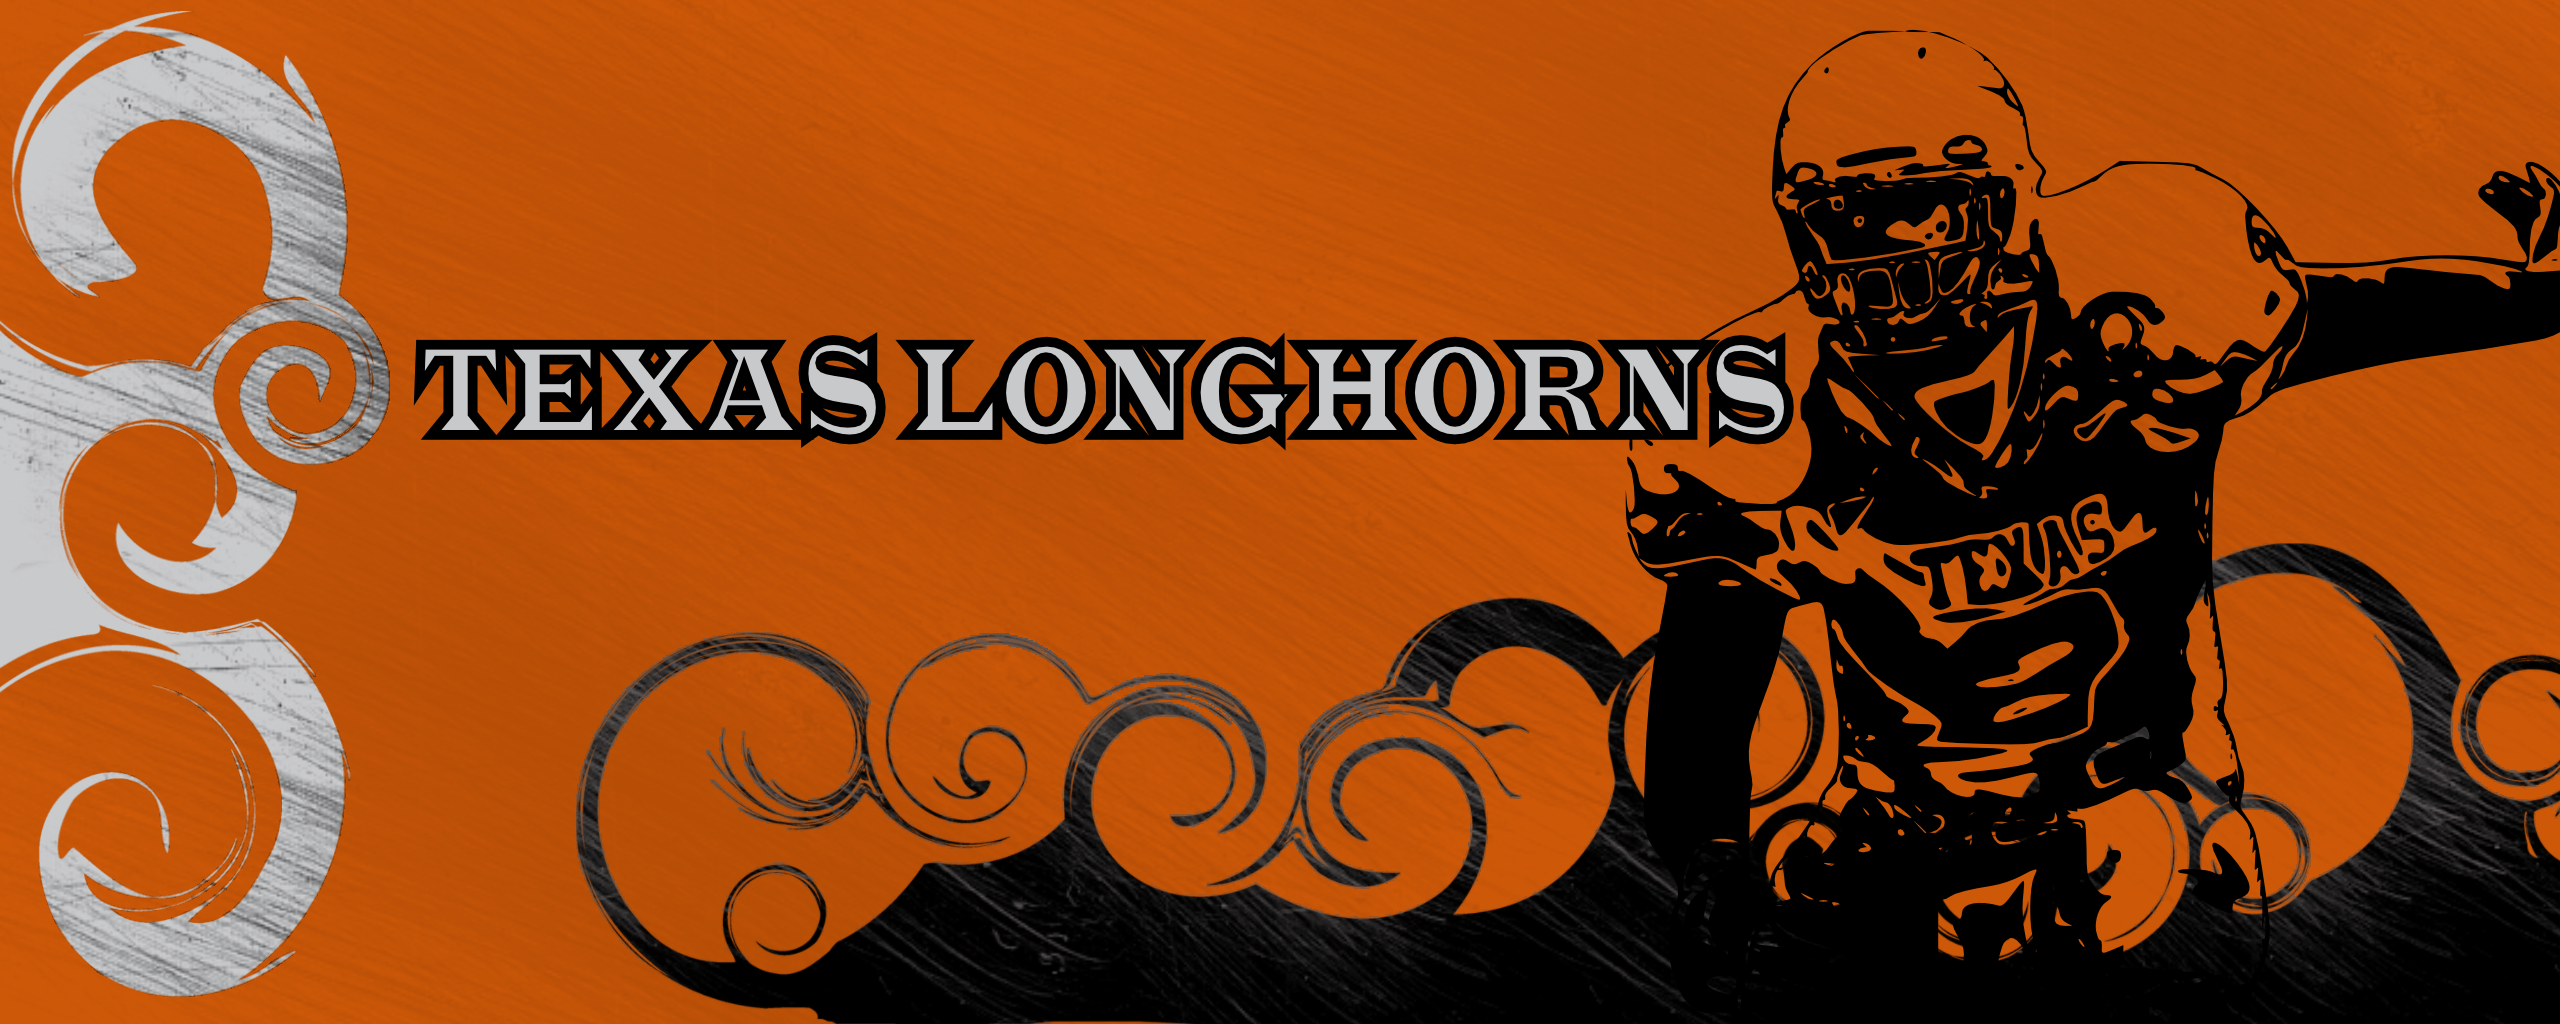 Texas Longhorn Home University Co Op Wallpapers Pictures to pin on